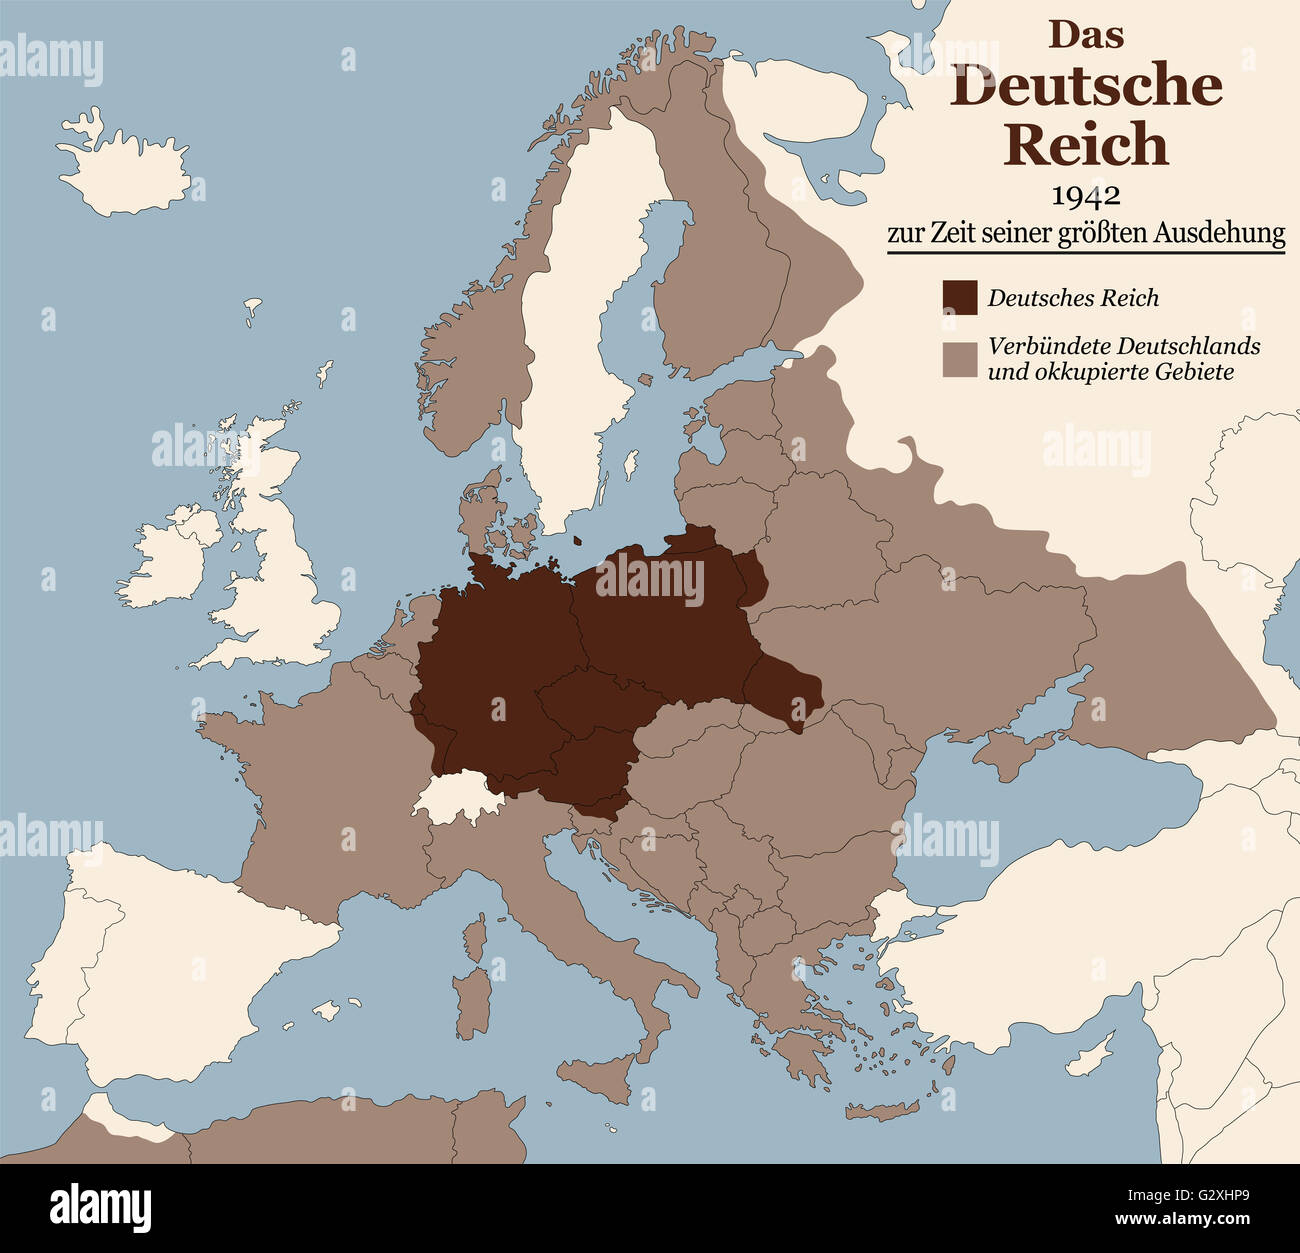 Third Reich At Its Greatest Extent In 1942 Map Of Nazi Germany In